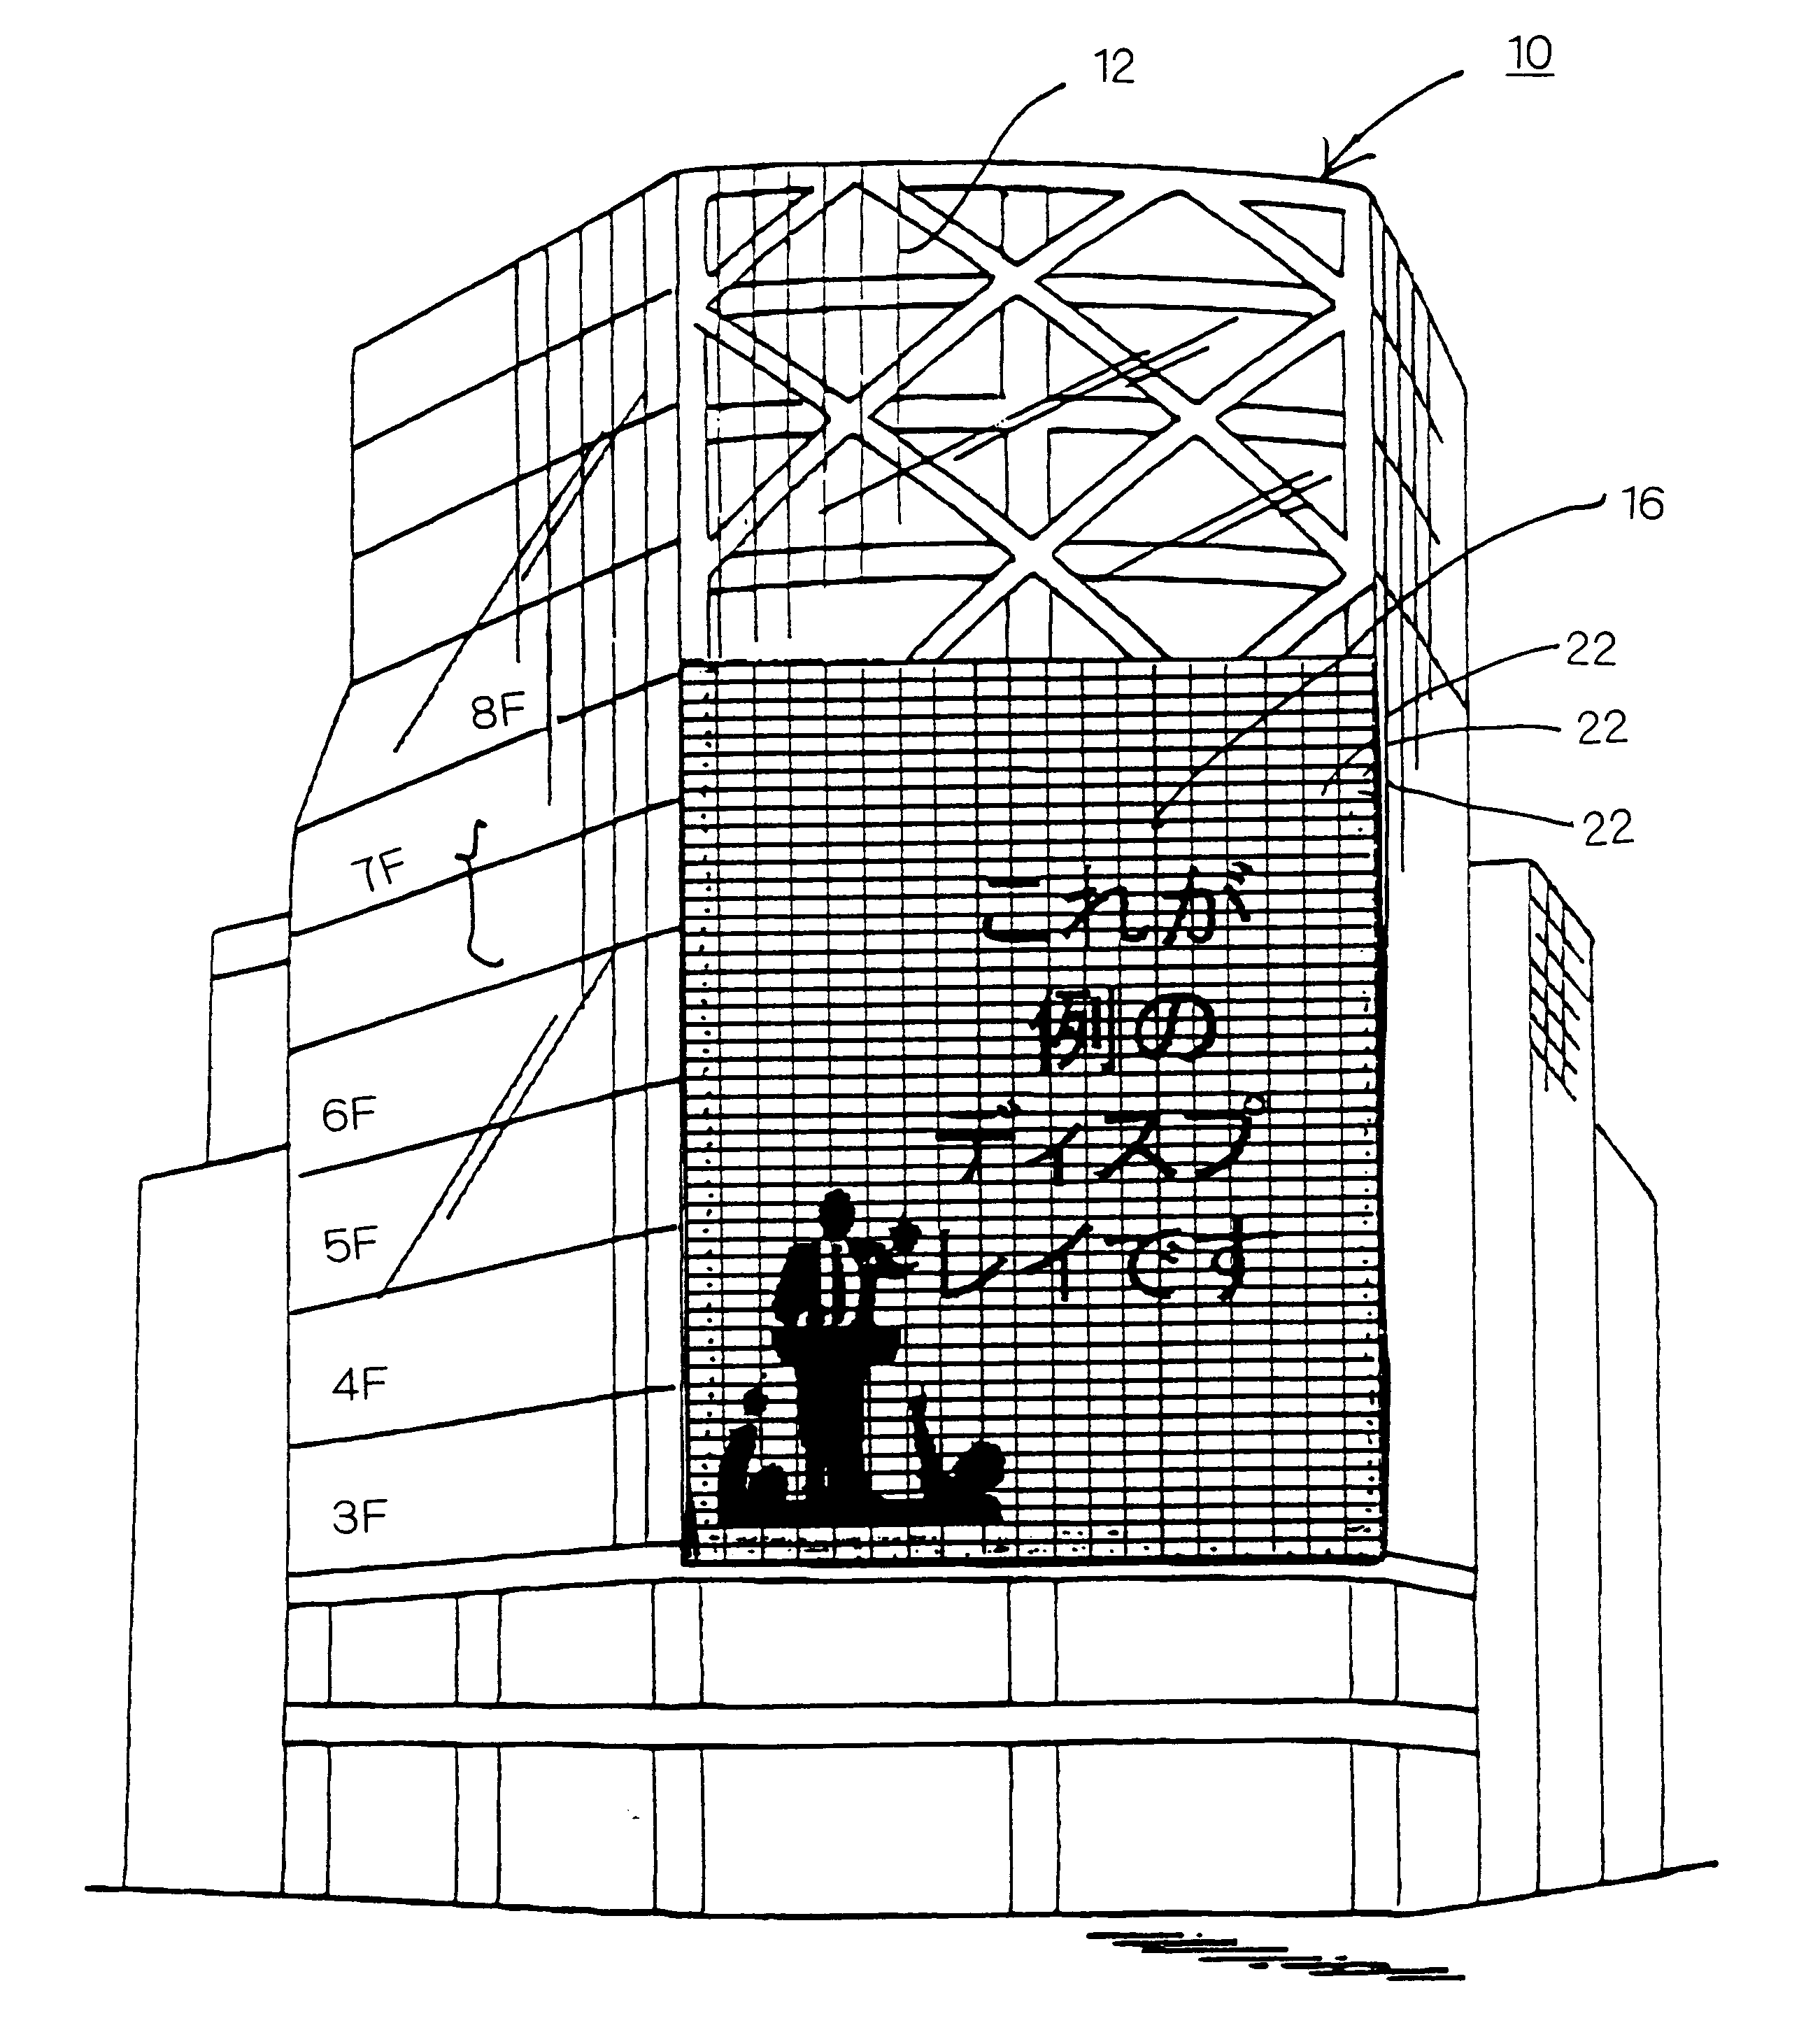 High-rise building with large scale display device inside transparent glass exterior